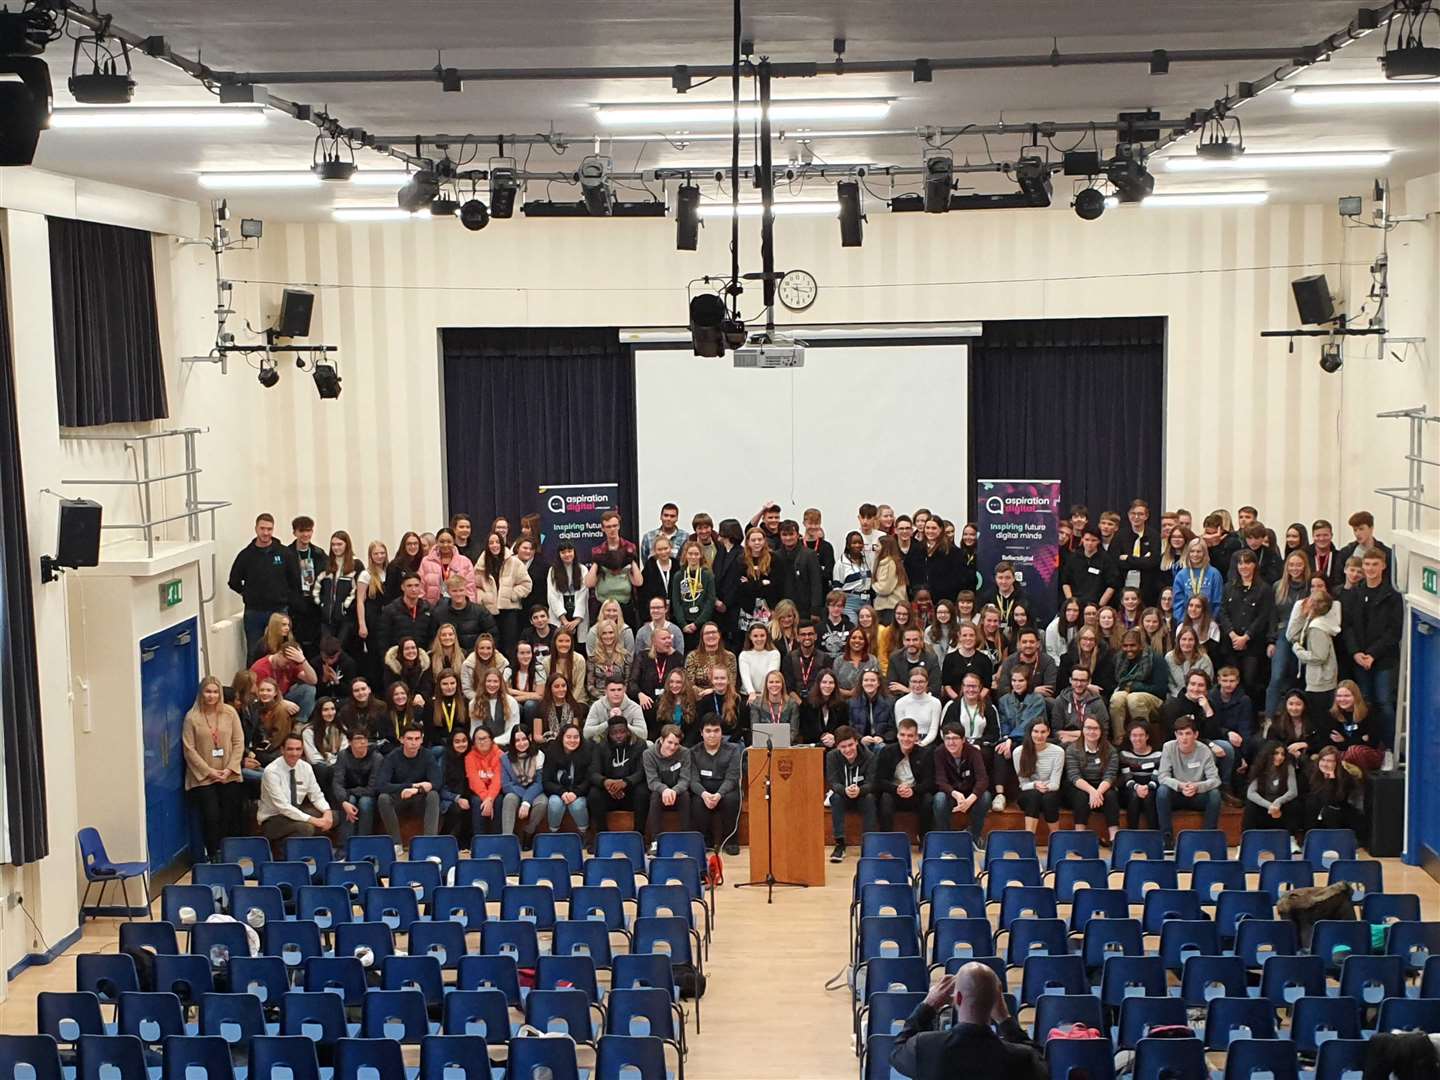 The audience at the school are pictured with guest speakers at the event